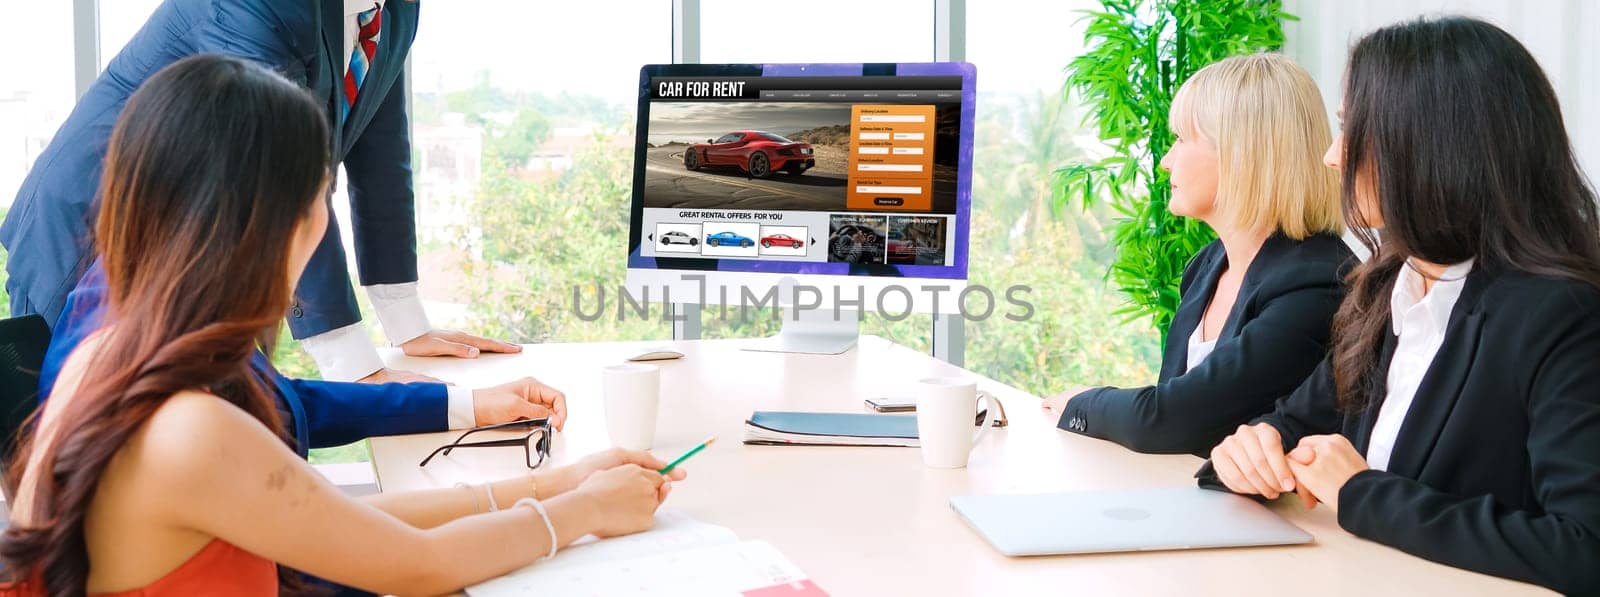 car rental website on computer screen for tourist to rent a car for transportation snugly